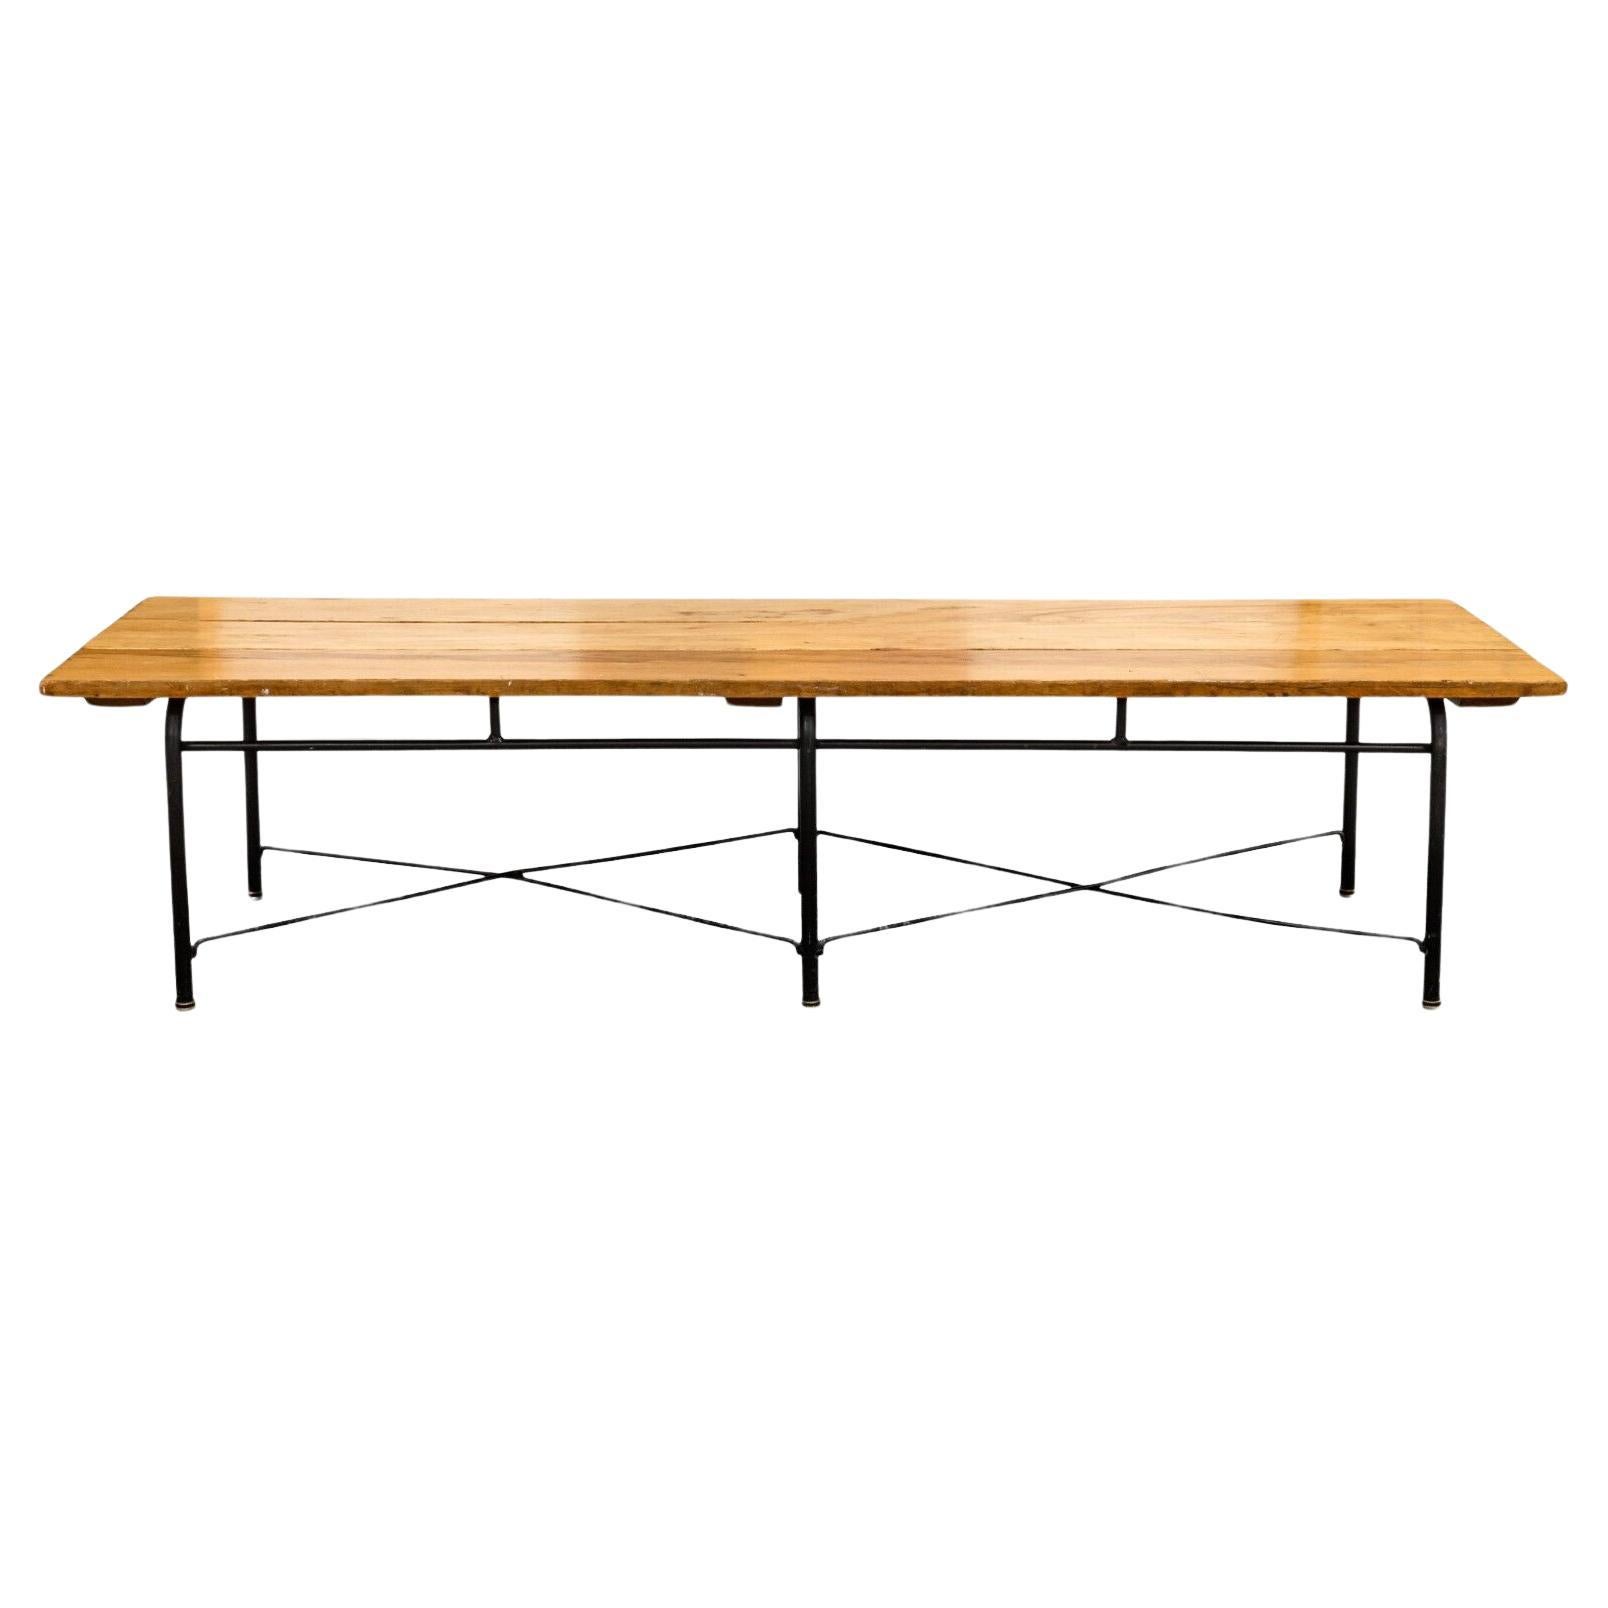 Paul McCobb Style Mid Century Modern Metal and Wood Bench For Sale